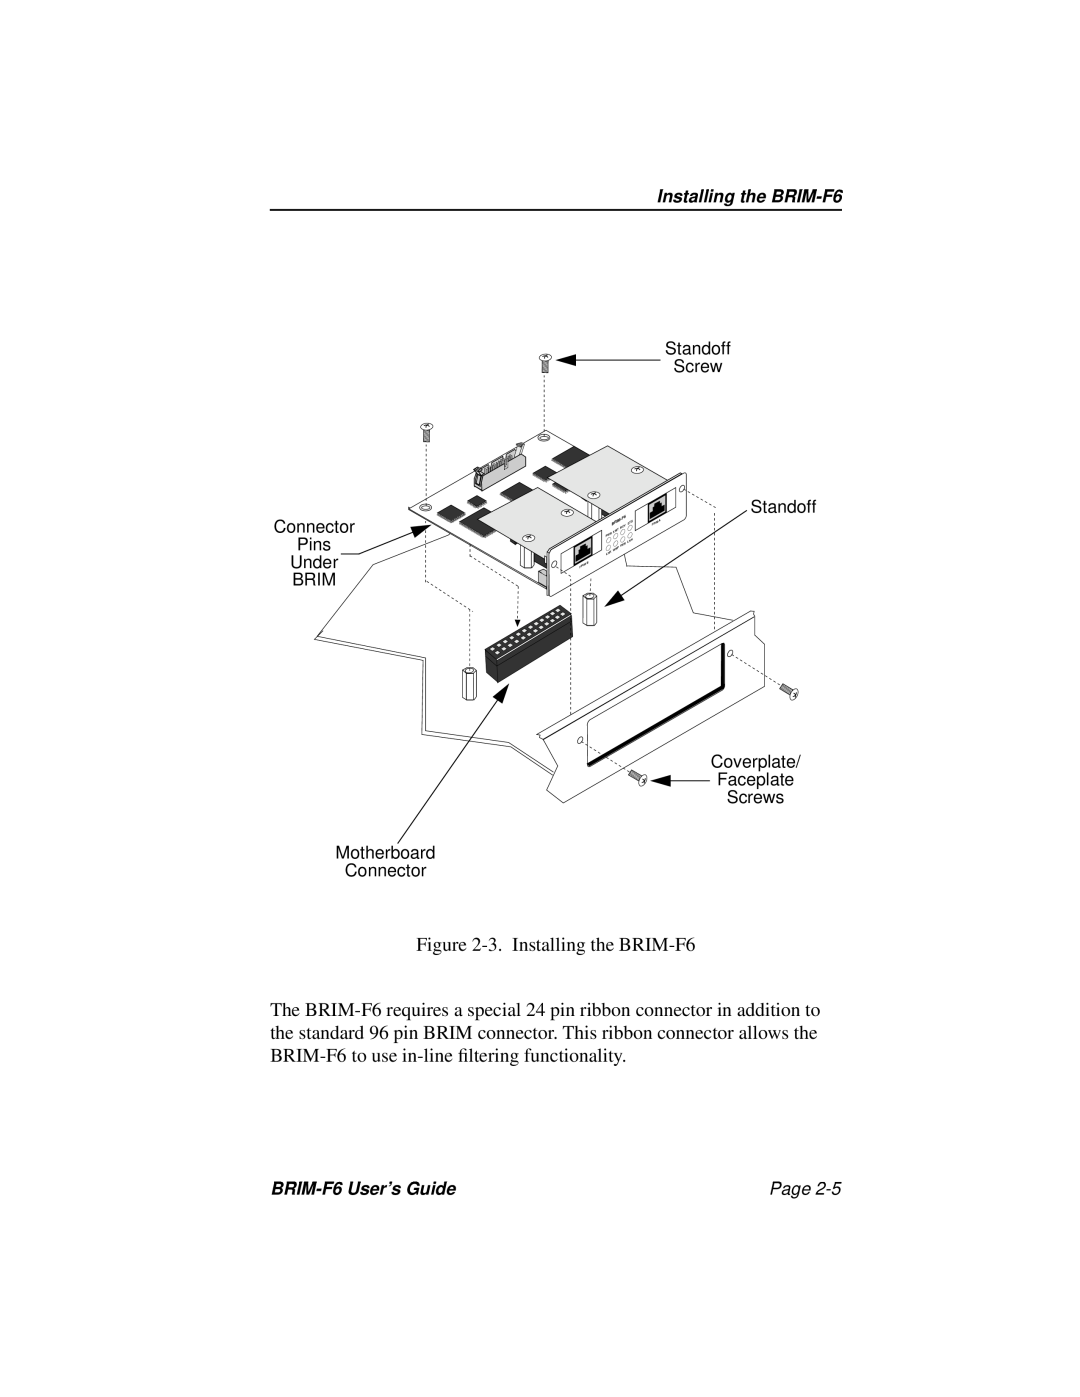 Cabletron Systems manual 3. Installing the BRIM-F6 